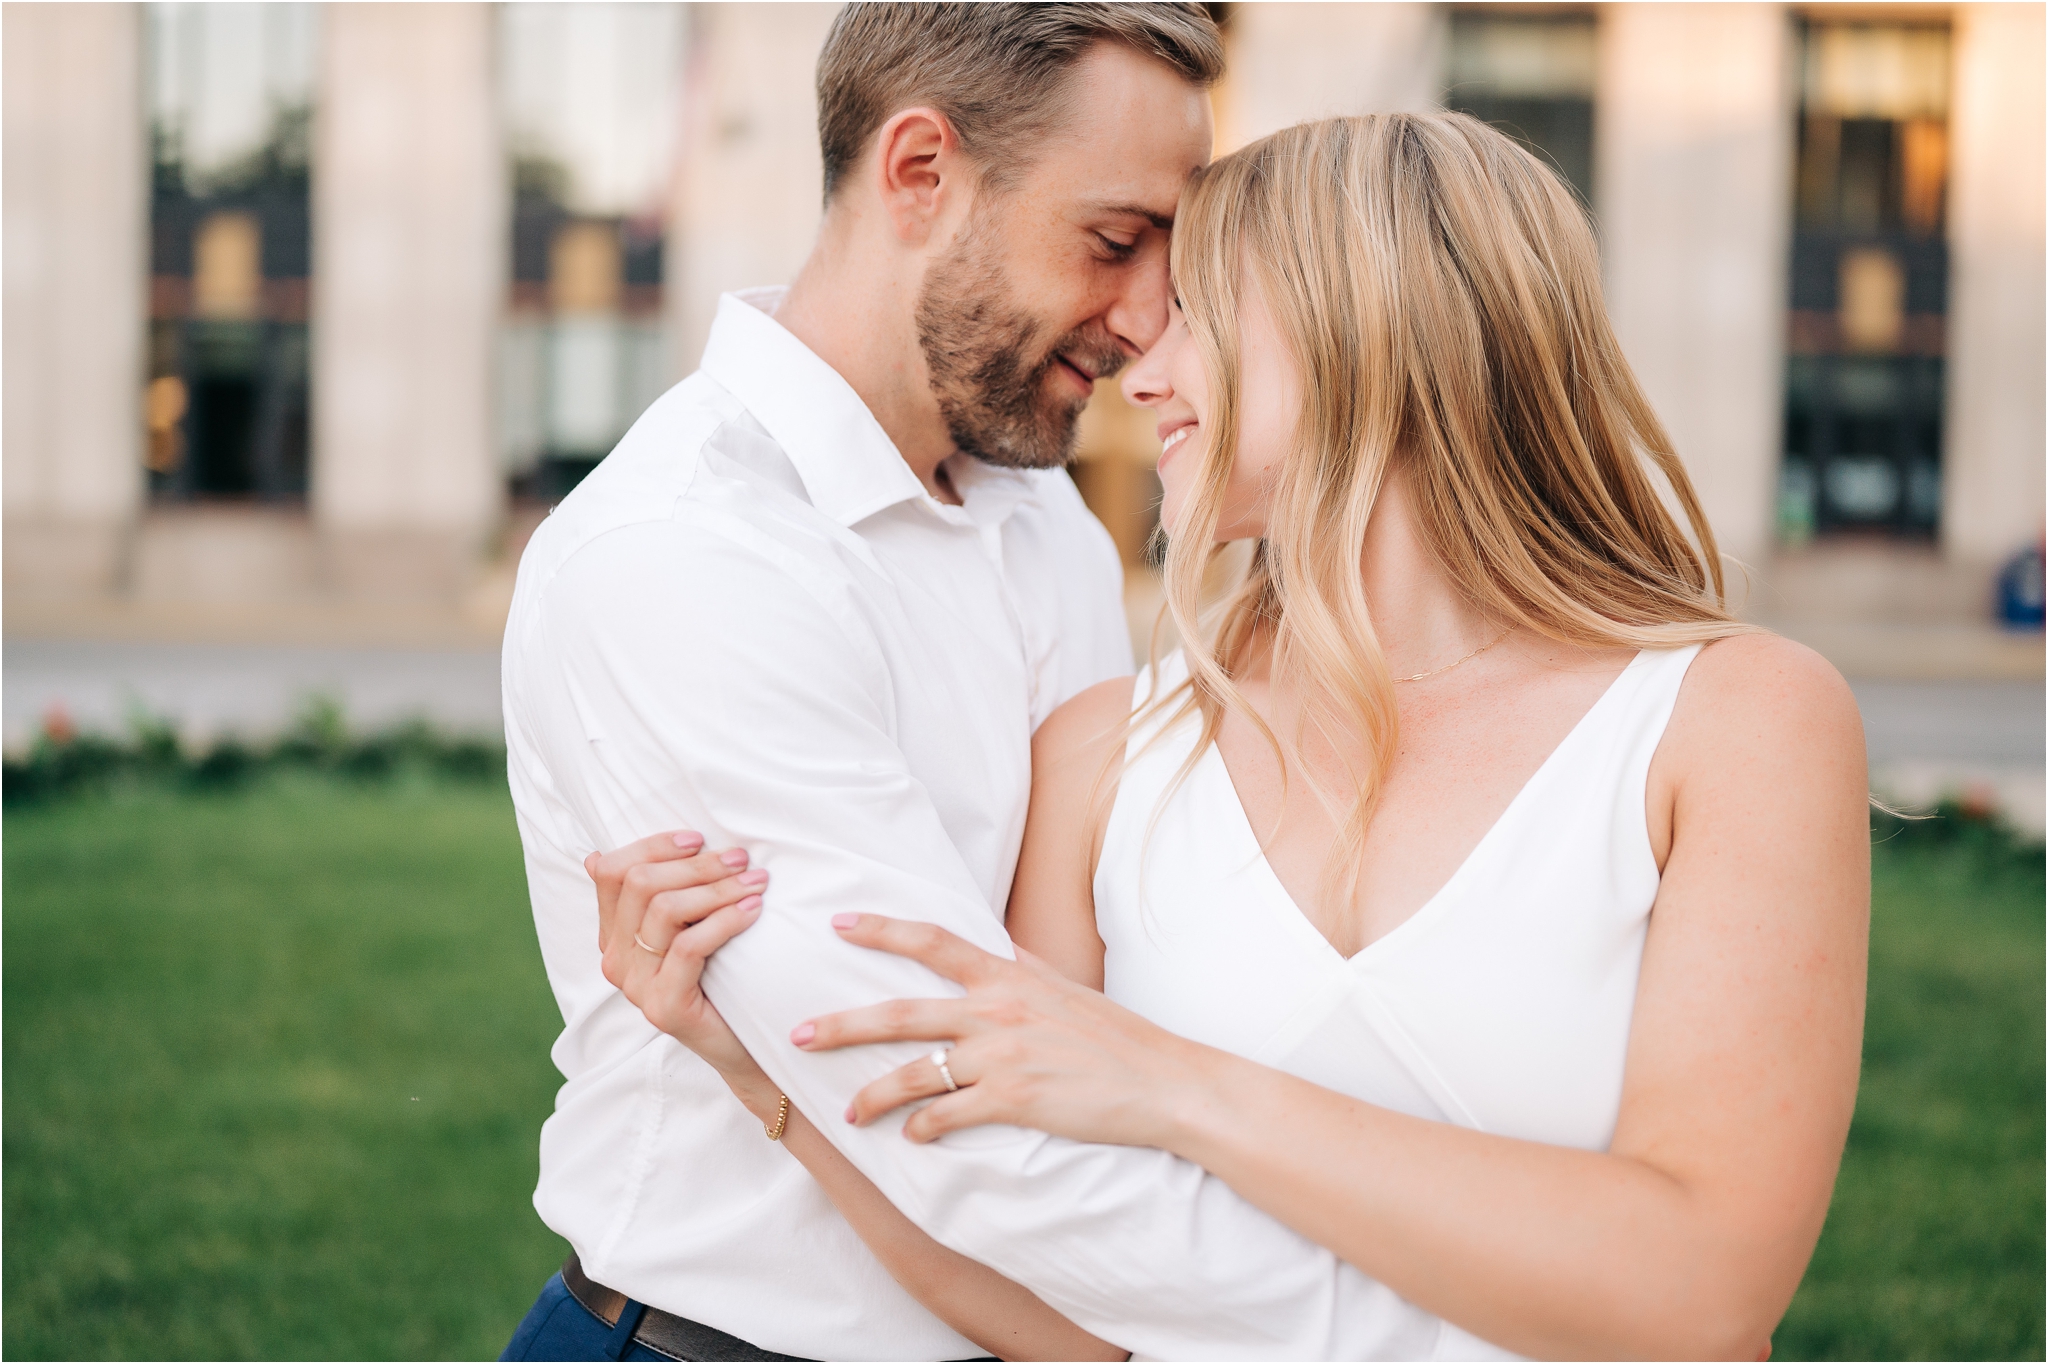 courthouse lawn for engagement photos